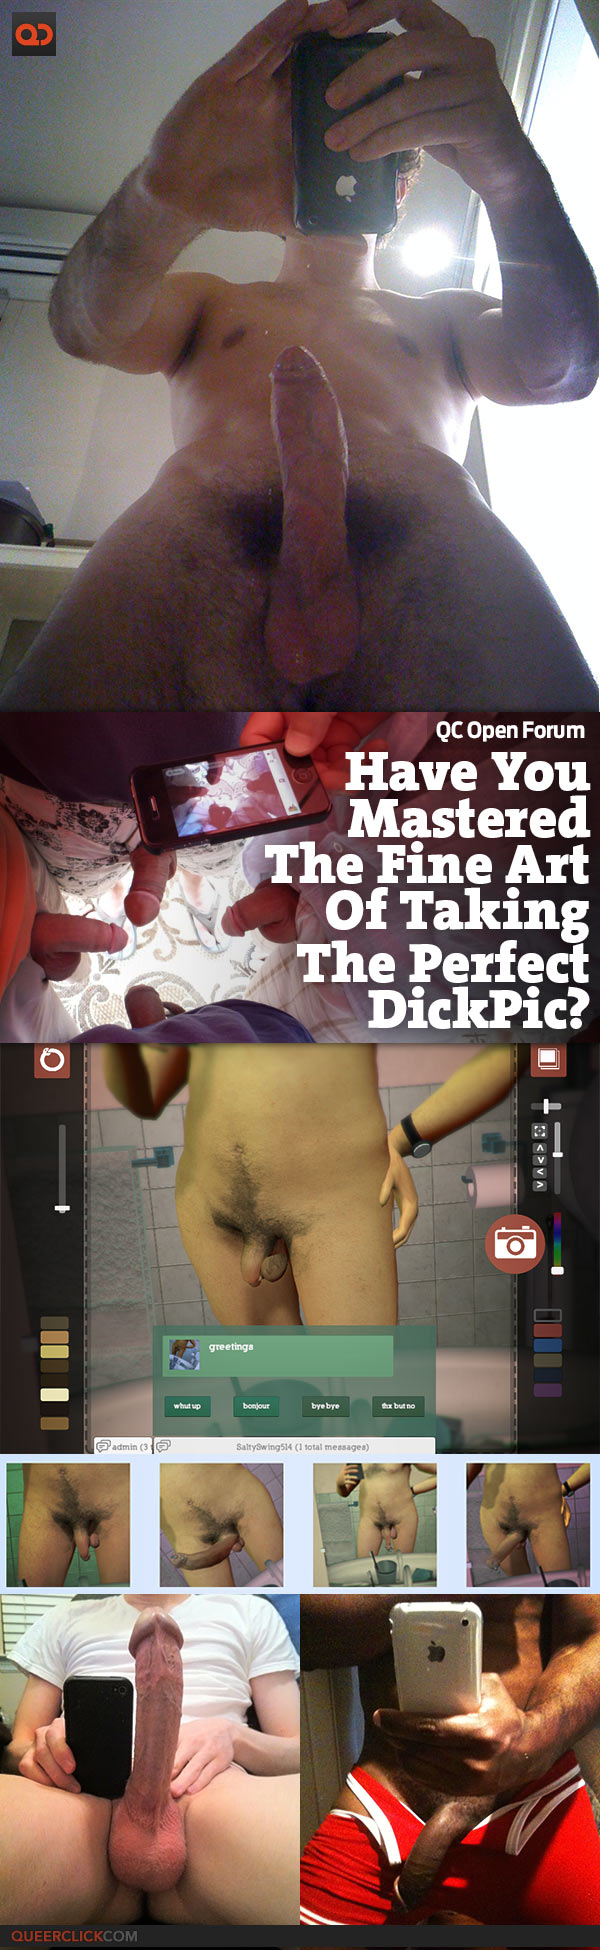 QC Open Forum: Have You Mastered The Fine Art Of Taking The Perfect DickPic?